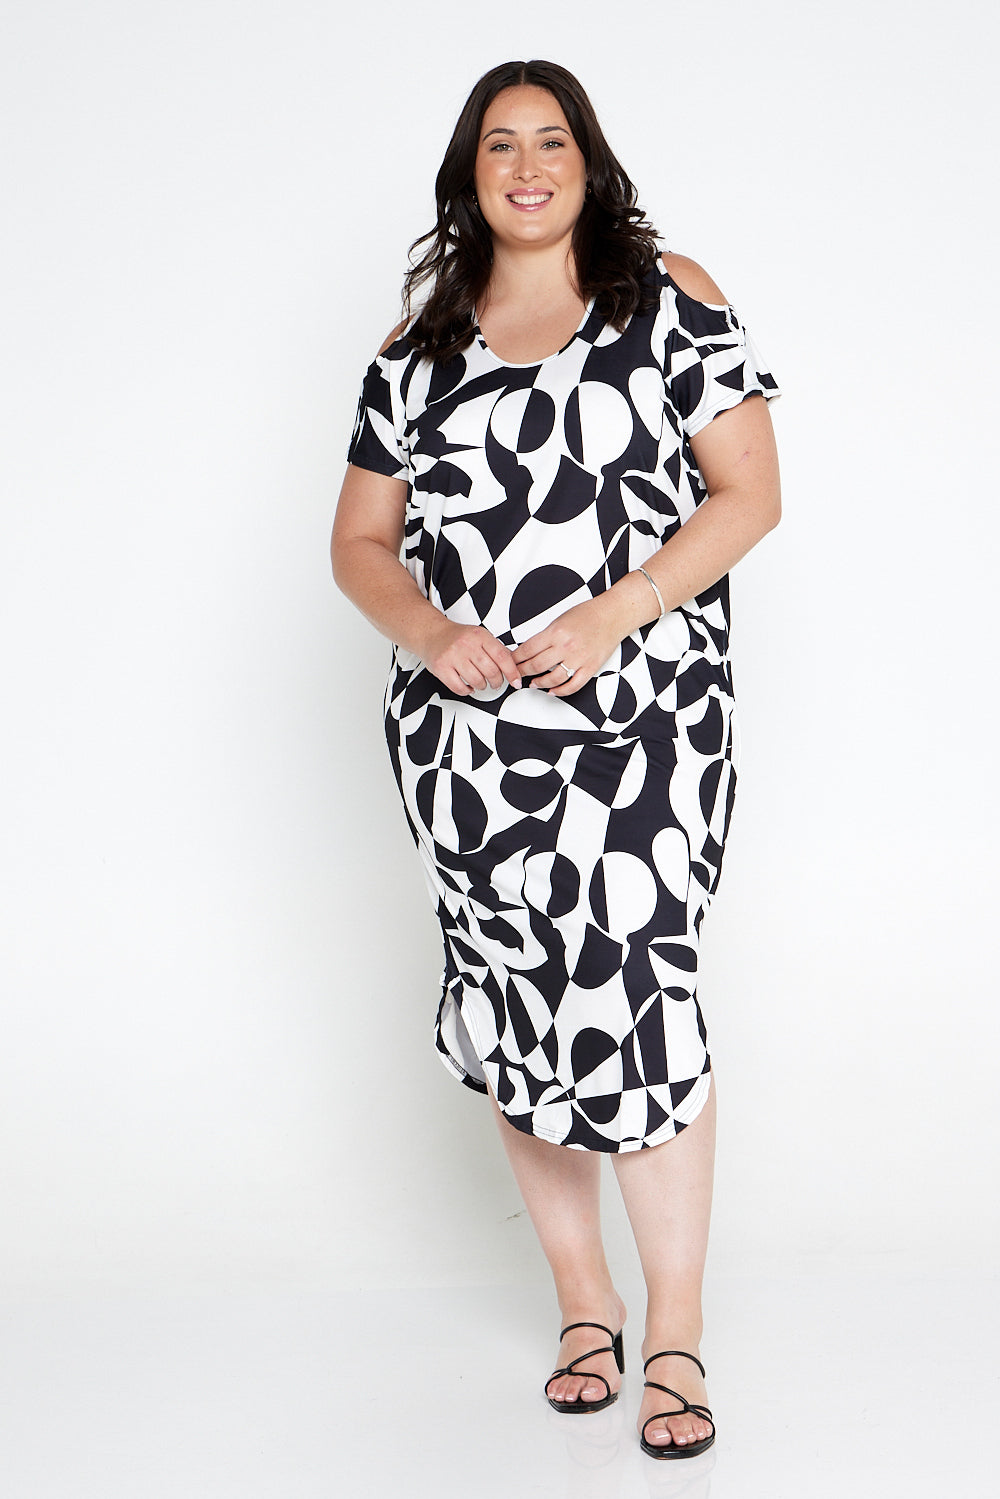 Workwear Wednesday: 5 Bold Printed Plus Size Dresses Perfect For